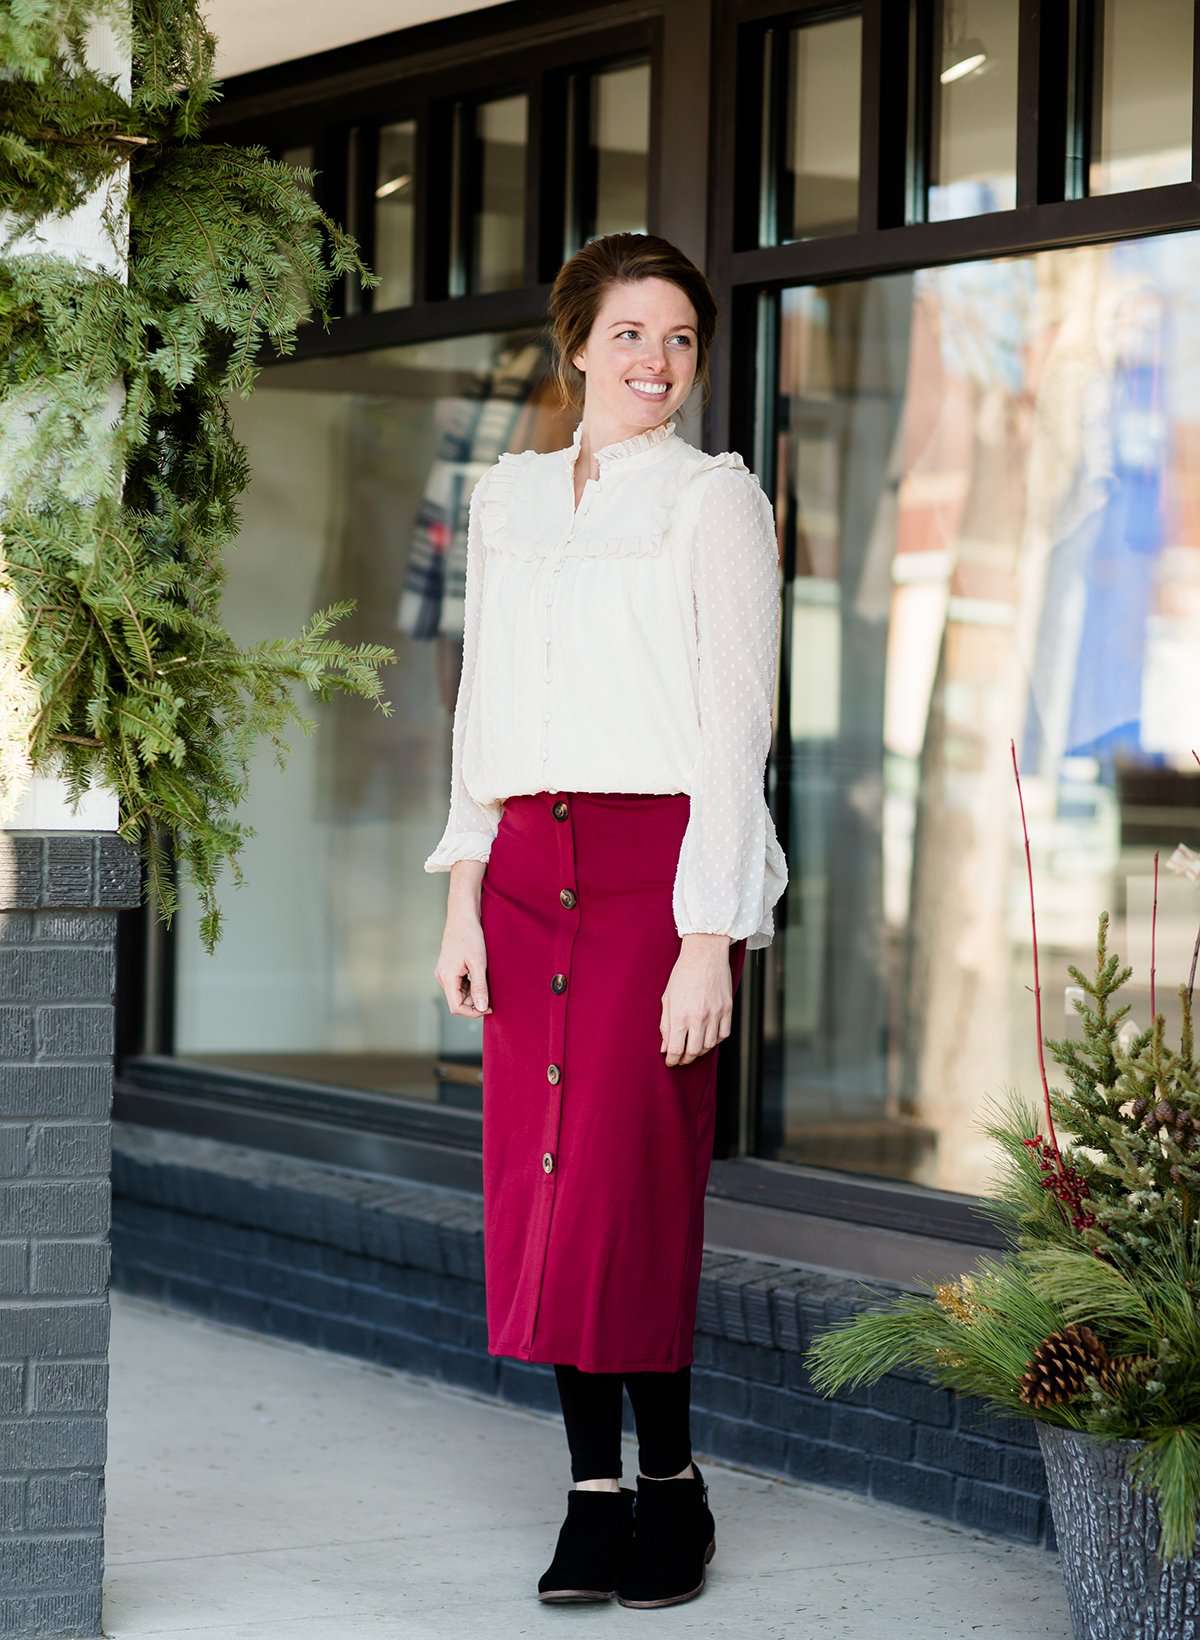 Modest below the knee wine colored skirt. This skirt has faux buttons and is paired with a white blouse and black boots.